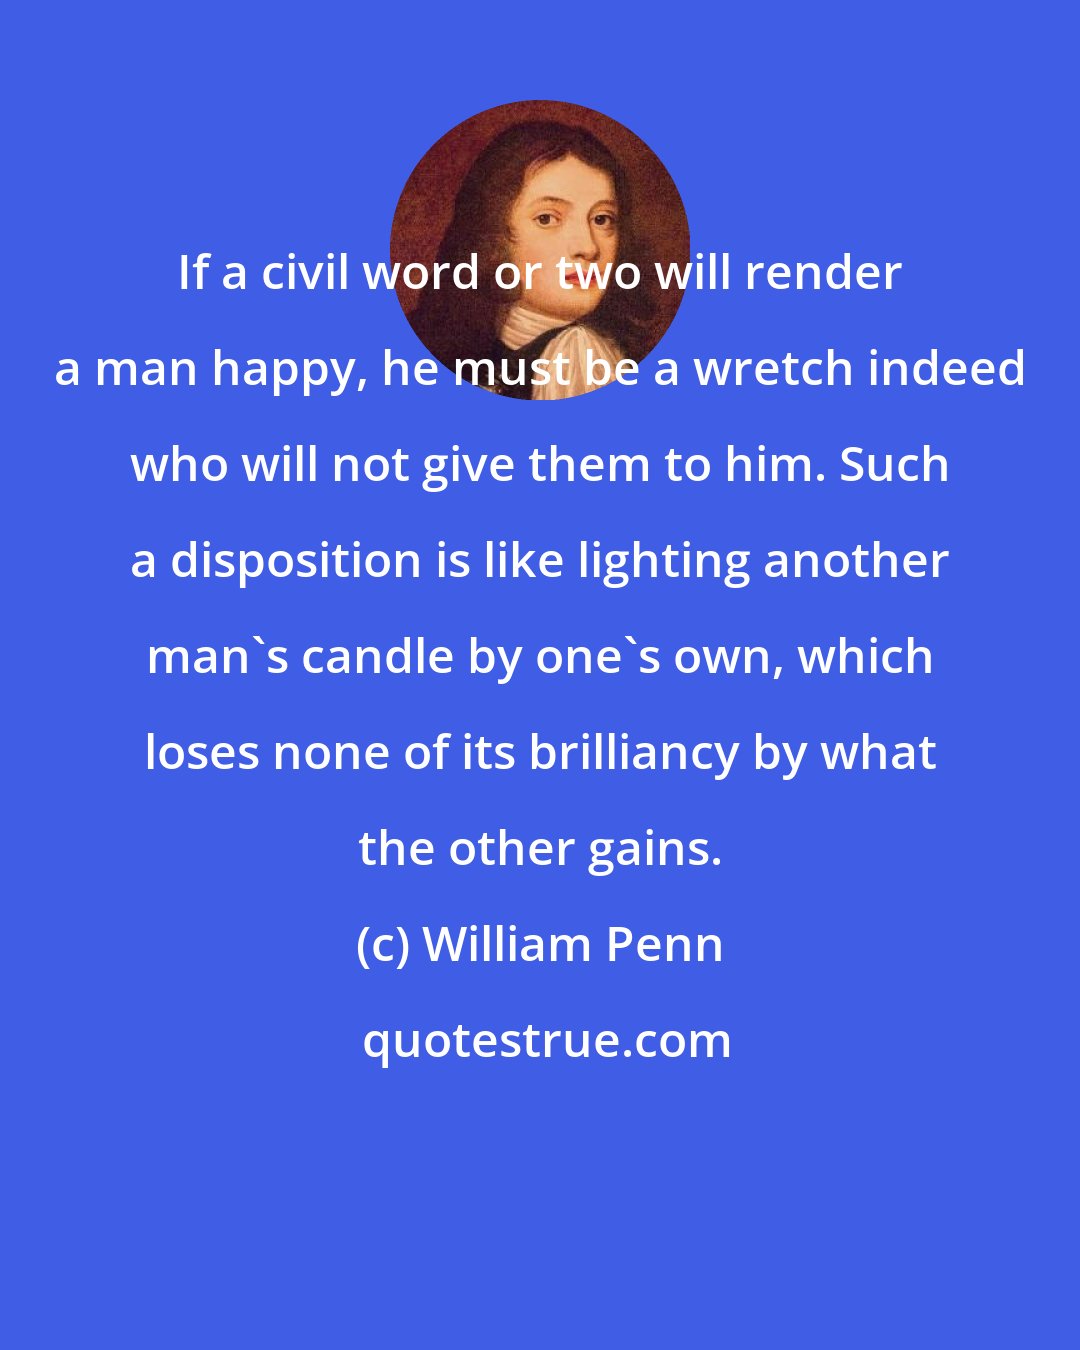 William Penn: If a civil word or two will render a man happy, he must be a wretch indeed who will not give them to him. Such a disposition is like lighting another man's candle by one's own, which loses none of its brilliancy by what the other gains.